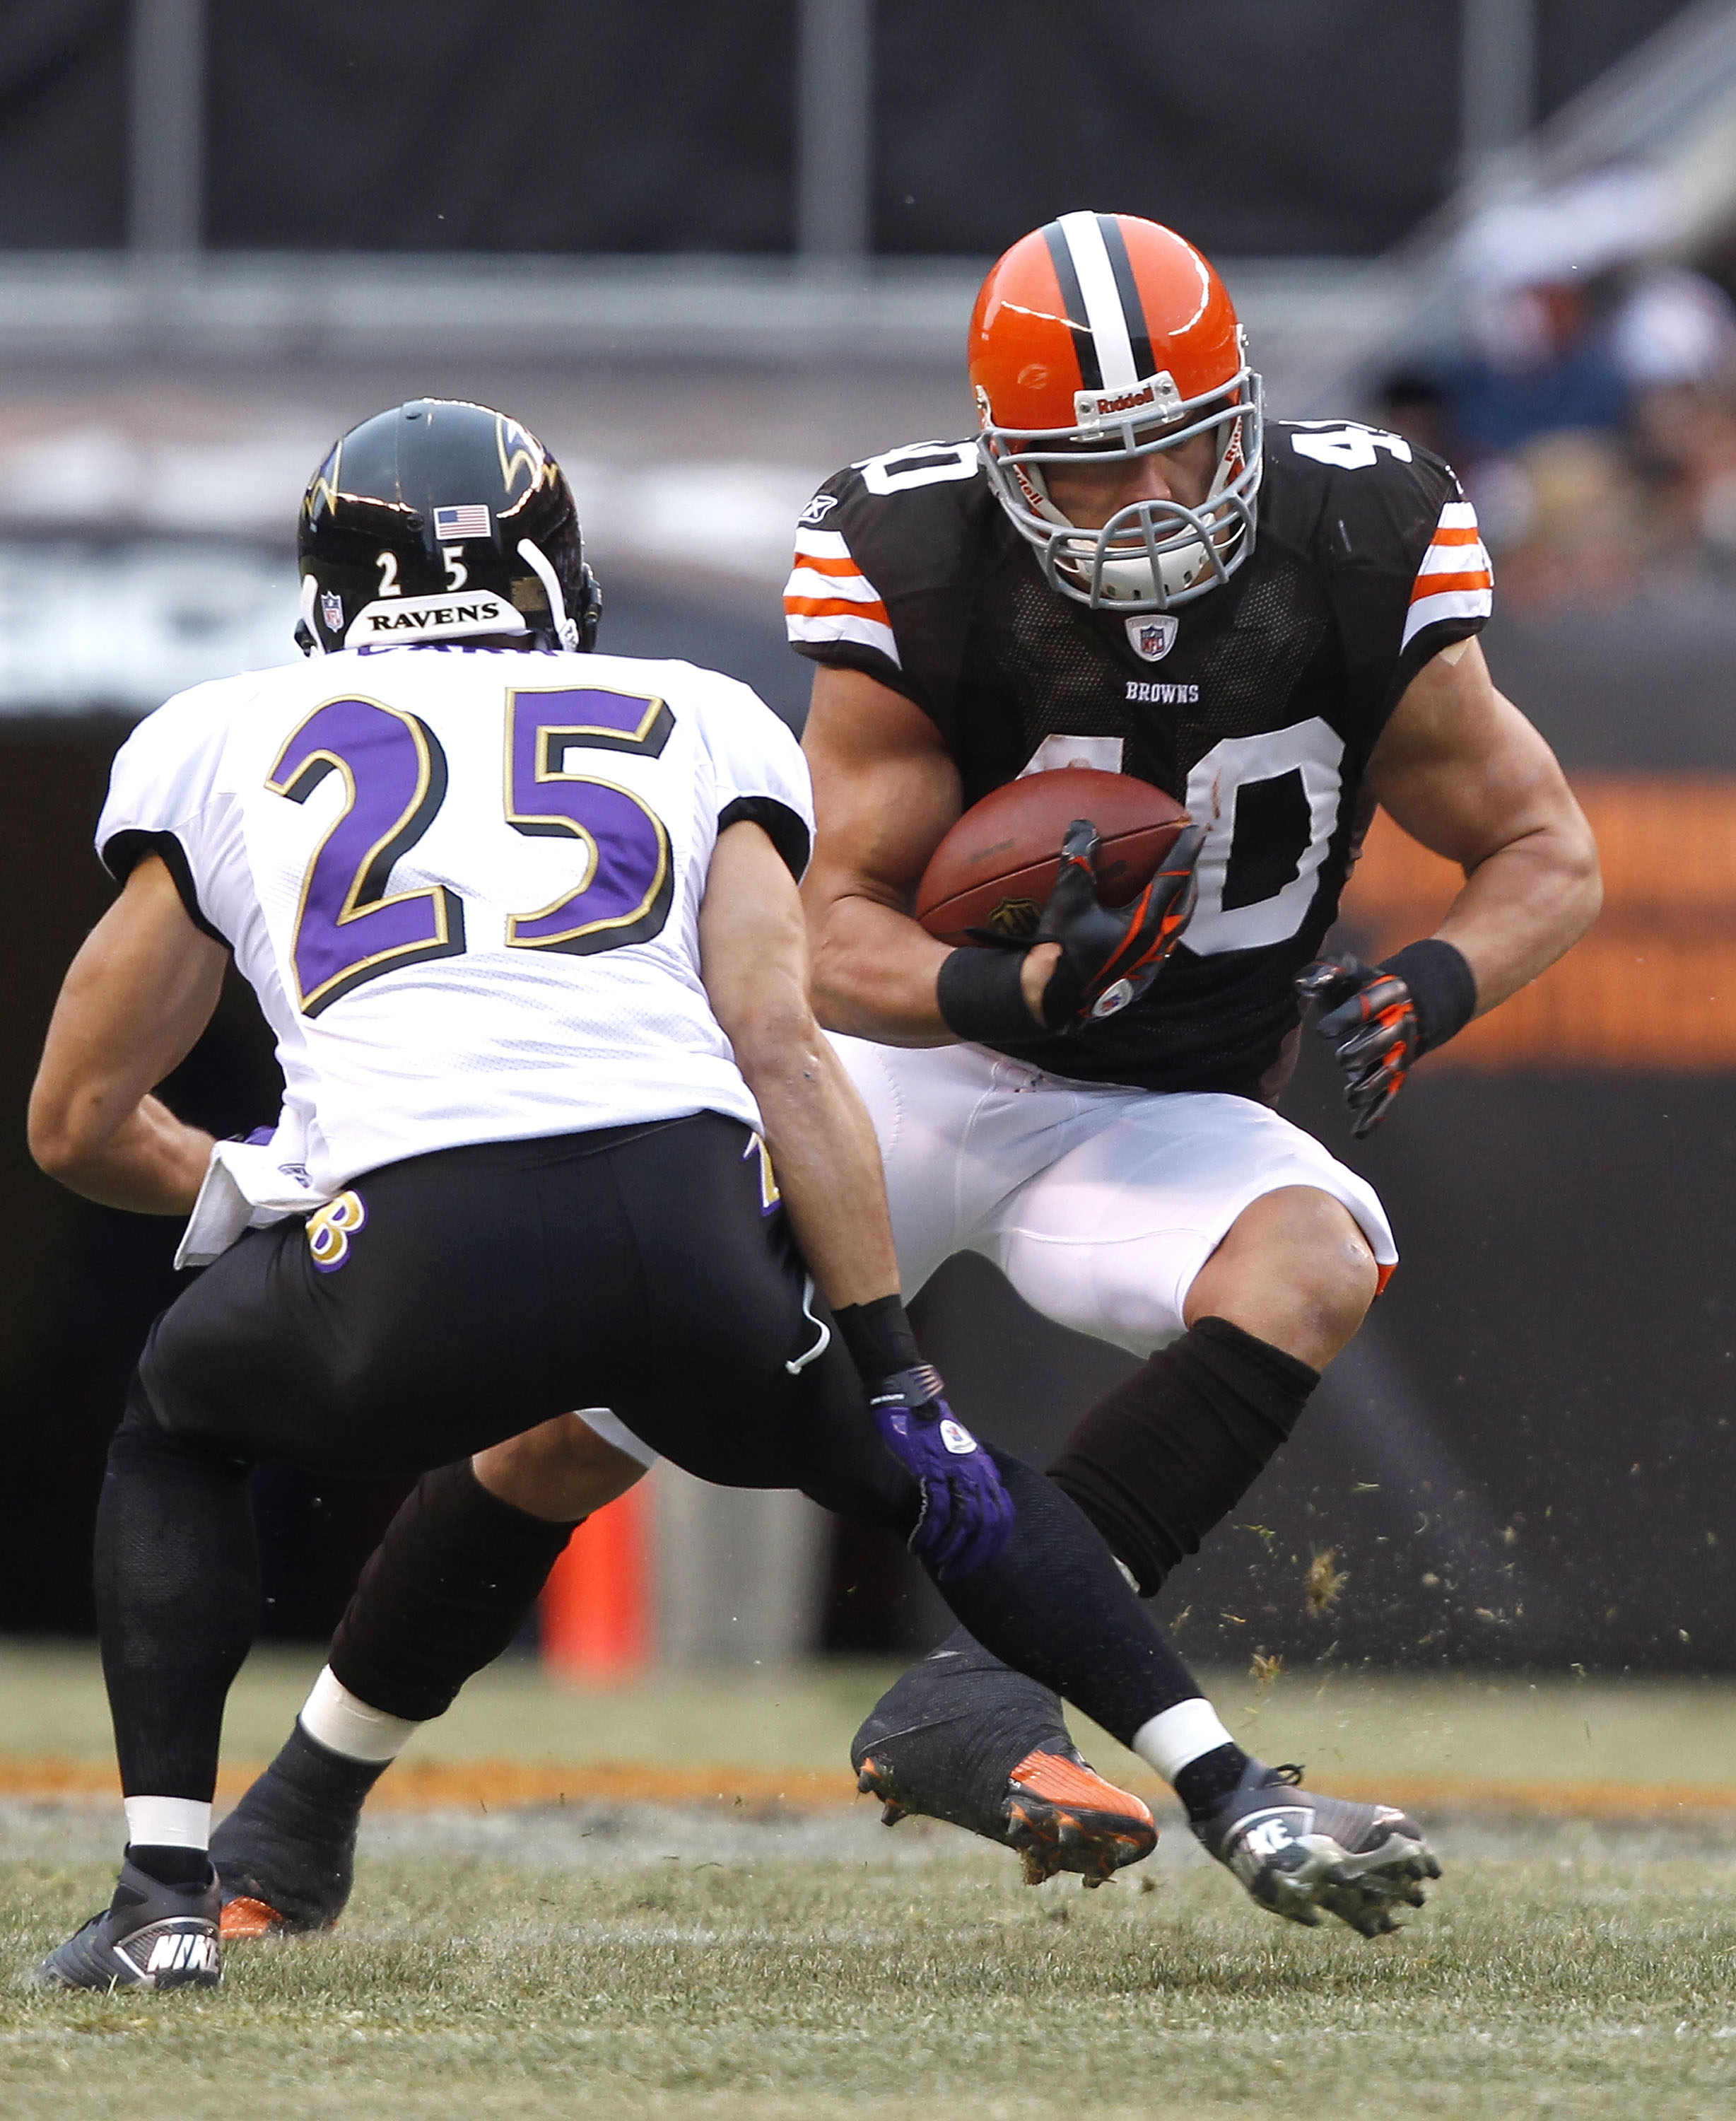 CLEVELAND - DECEMBER 26:  Tailback Peyton Hillis #40 of the Cleveland Browns runs the ball by cornerback Chris Carr #25 of the Baltimore Ravens at Cleveland Browns Stadium on December 26, 2010 in Cleveland, Ohio.  (Photo by Matt Sullivan/Getty Images)